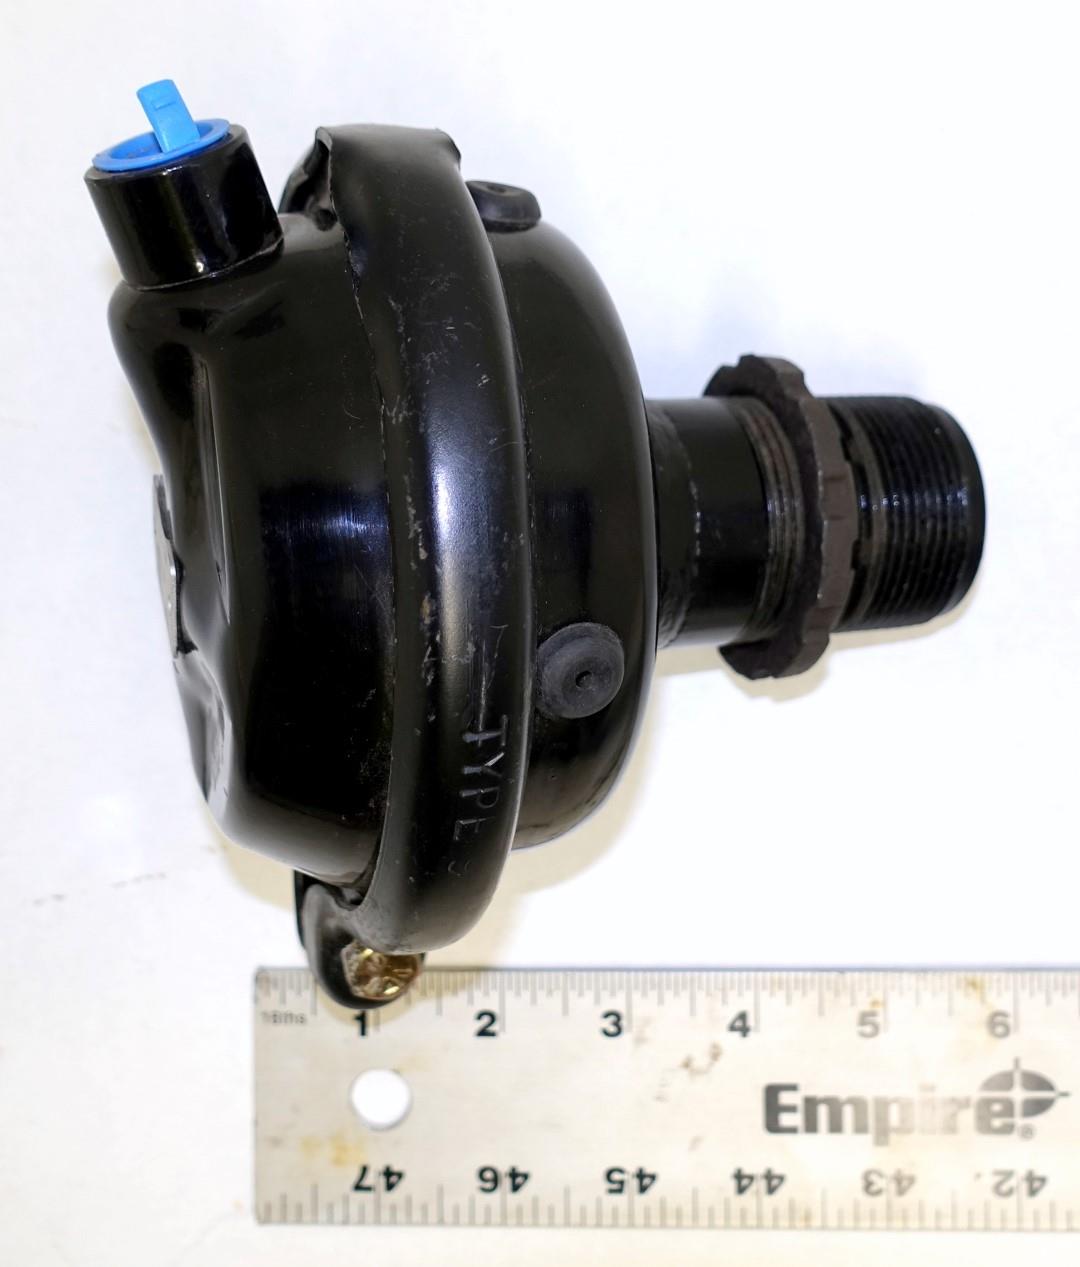 M9-954 | 2530-01-082-7181 Front Air Brake Chamber for M915 Tractor NOS (7).JPG